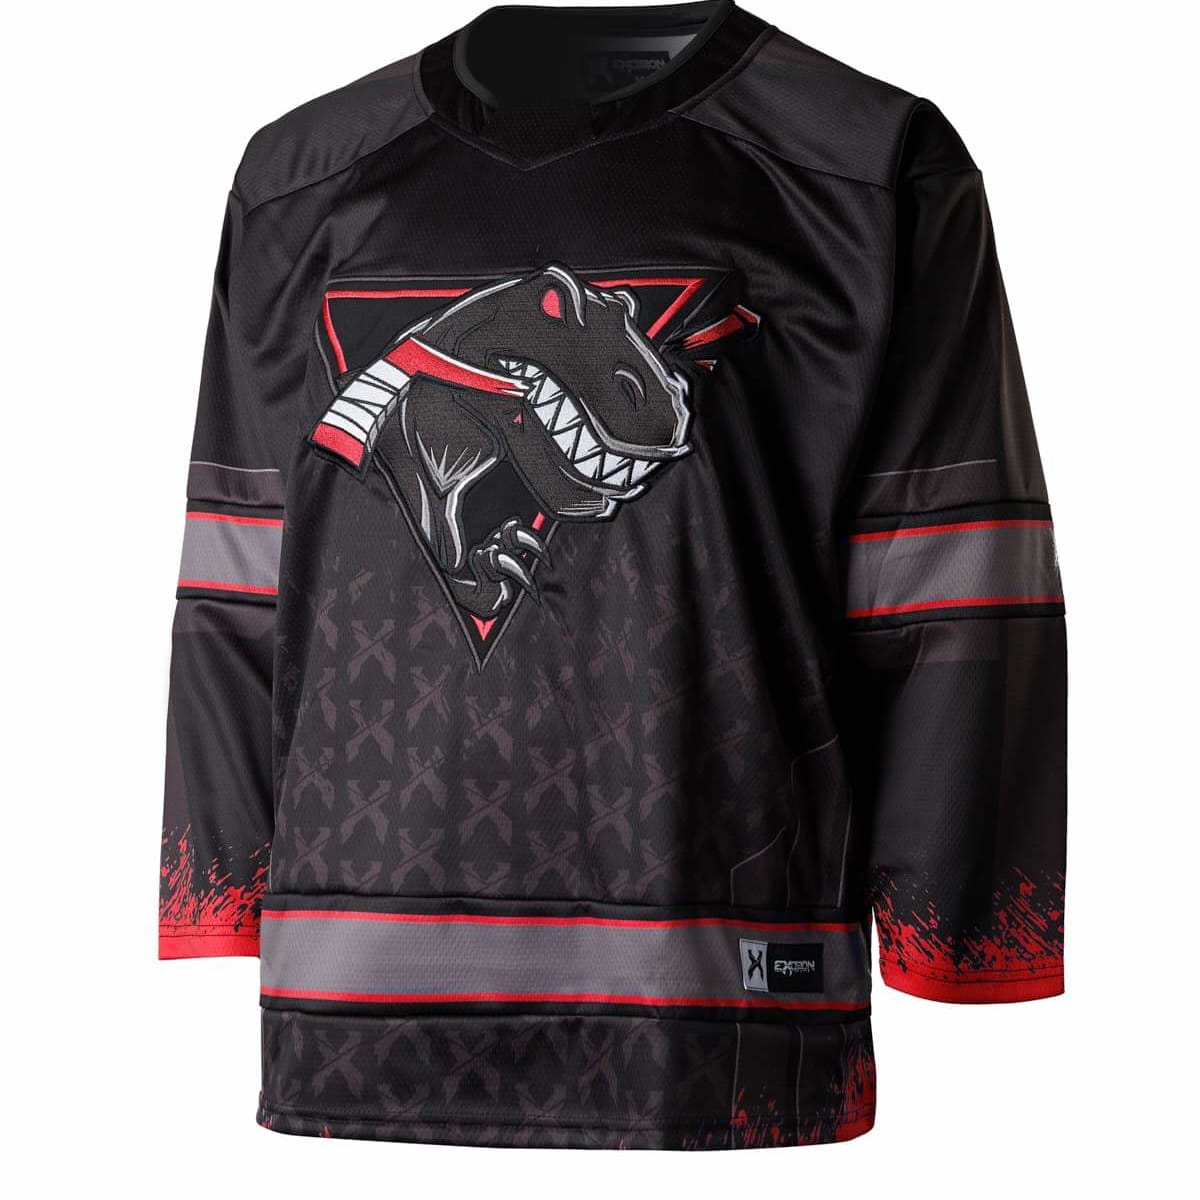 Excision Reveals Embroidered Hockey Jerseys In New Merchandise Drop Edm Com The Latest Electronic Dance Music News Reviews Artists - daft punk shirt read the description roblox